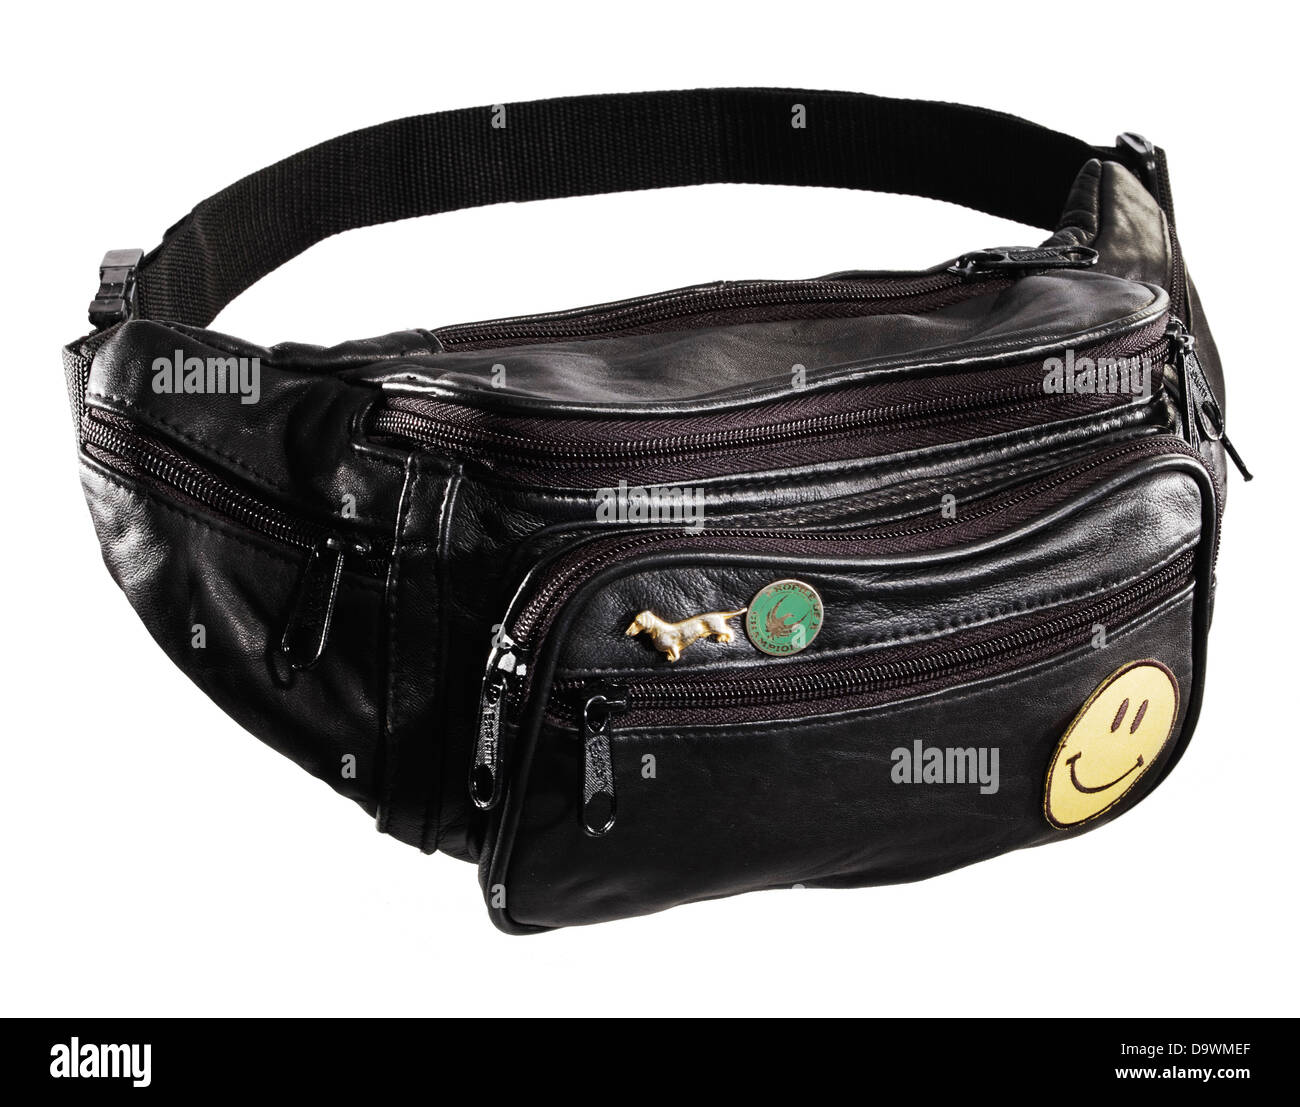 Waist bag for womens stylish and classy black color leather waist pouch  fanny pack girls daily use bag